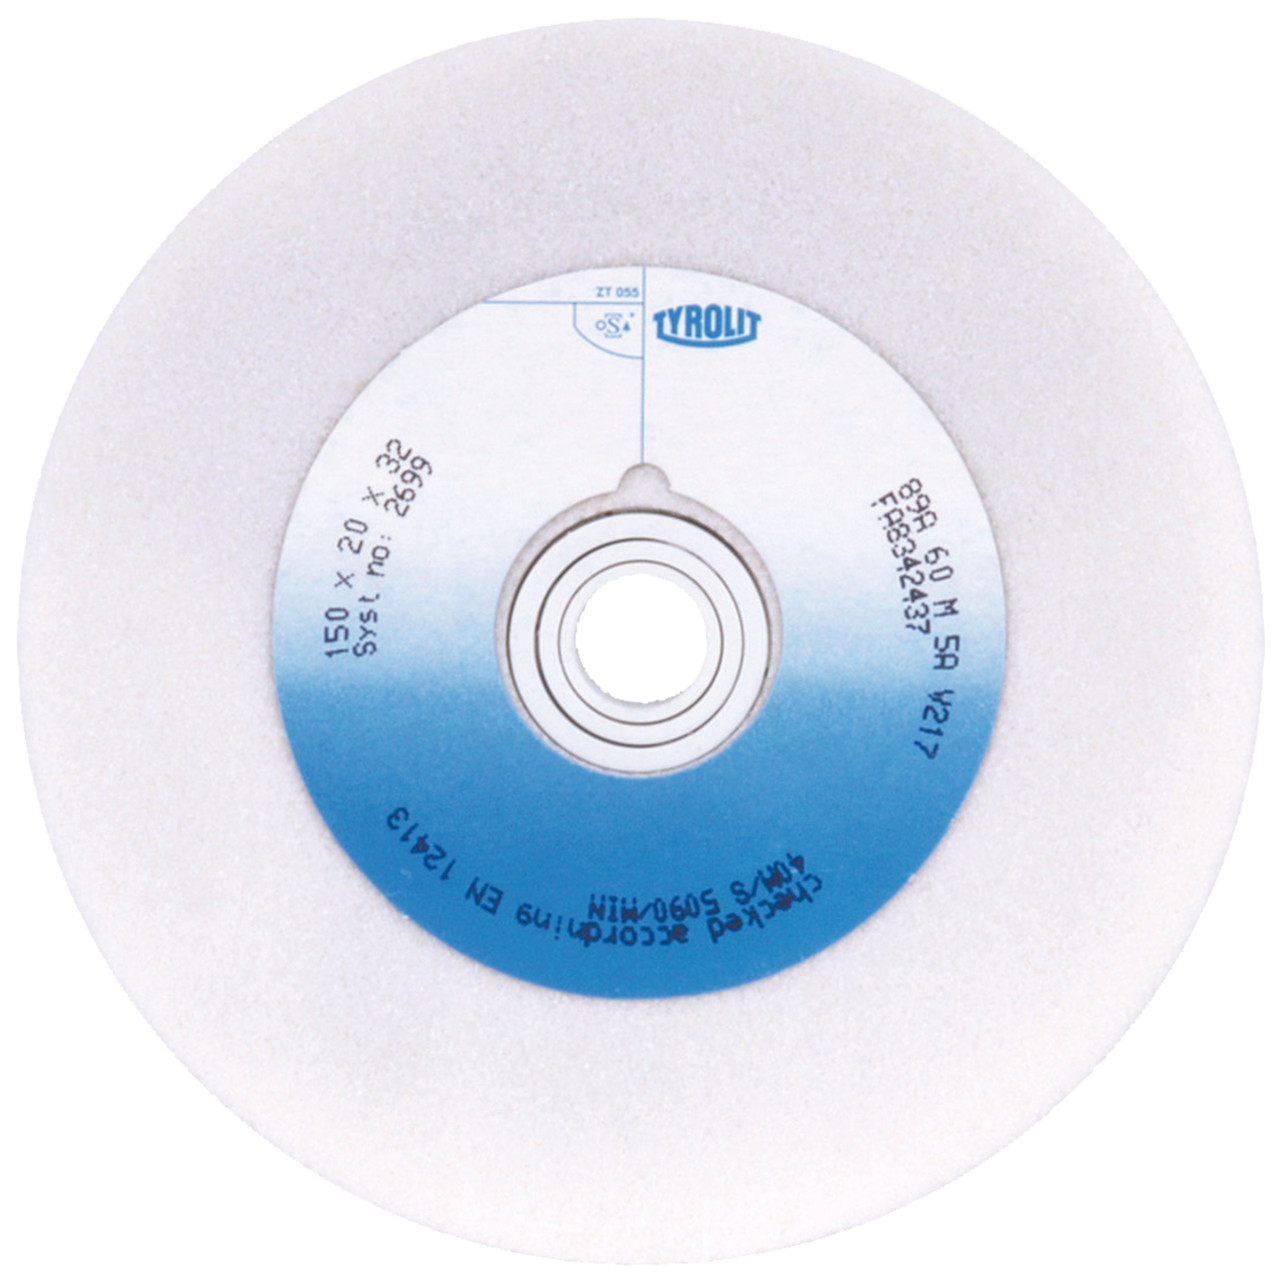 Tyrolit Conventional ceramic grinding discs DxDxH 175x25x51 For high-alloy steels and HSS, shape: 1, Art. 377415